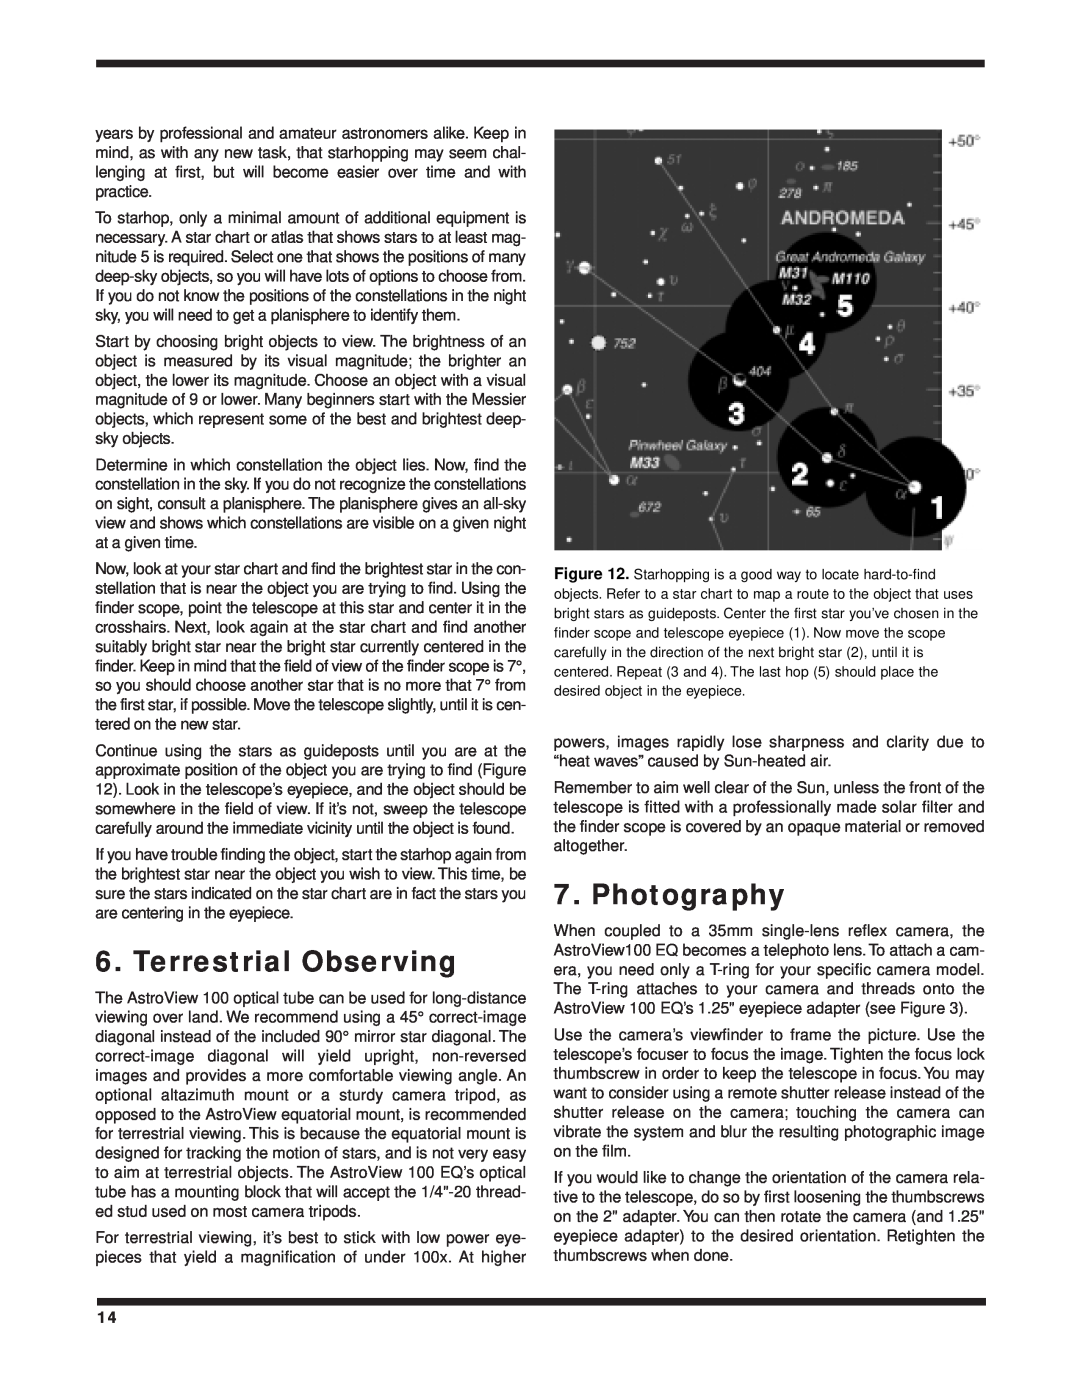 Orion 100 EQ instruction manual Terrestrial Observing, Photography 